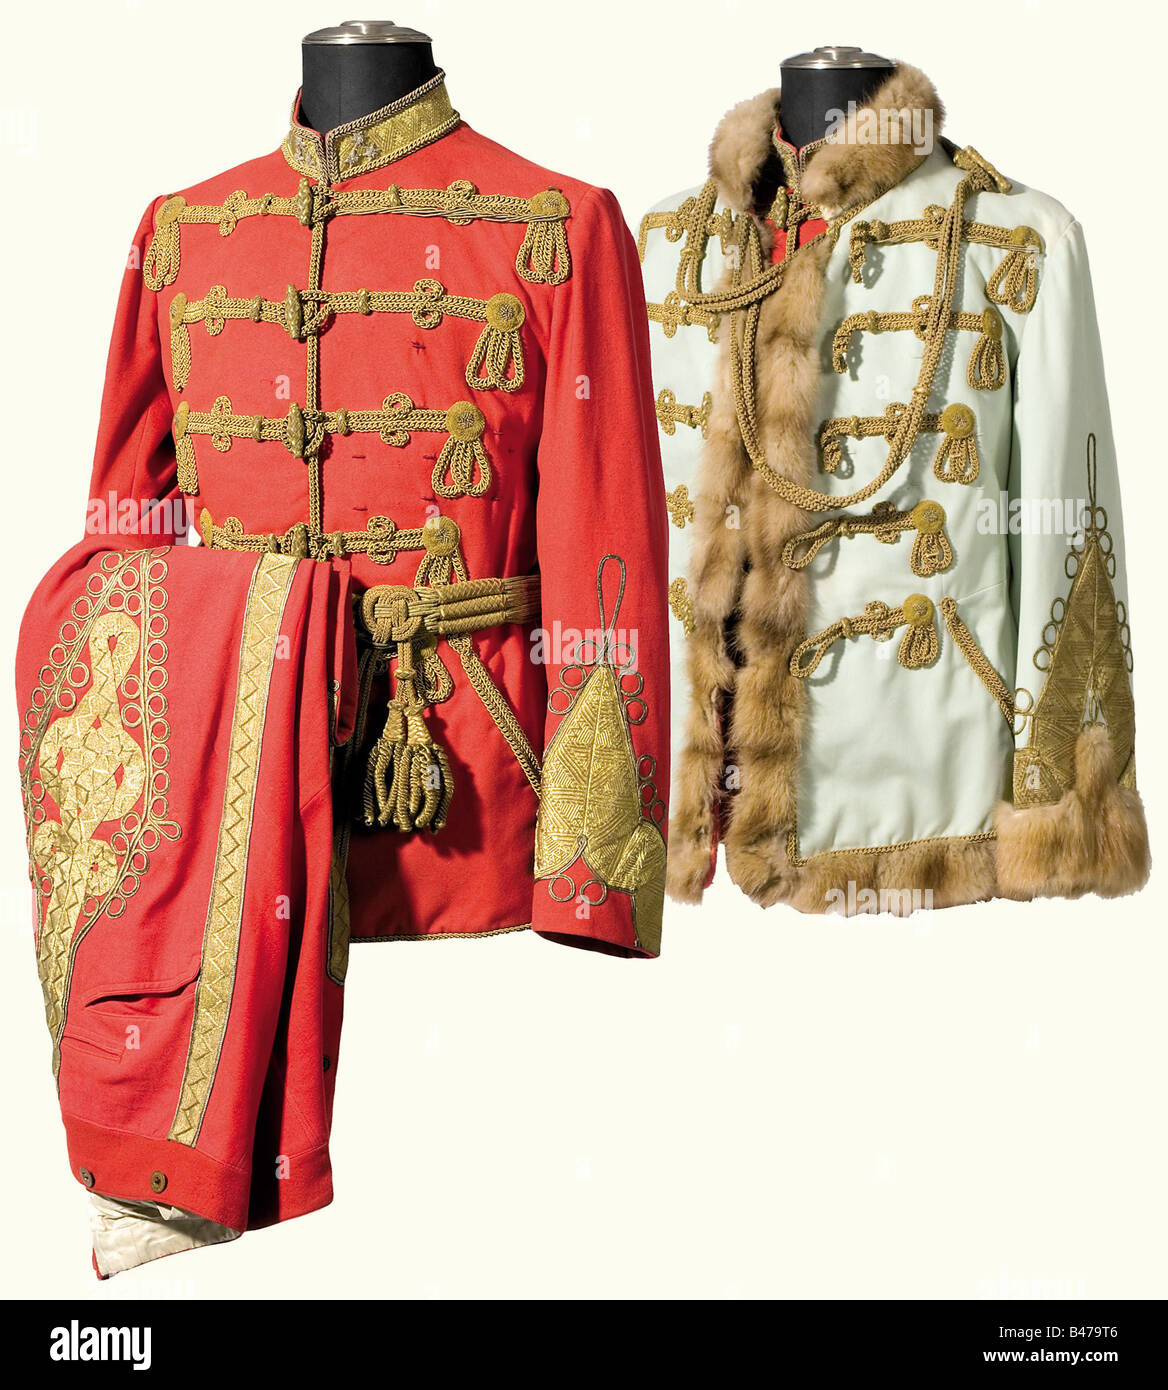 An Austrian Cavalry General's uniform, in Hungarian gala style, circa 1900 An attila of fine scarlet cloth with gold cord fastenings, olives and rosettes in braided gold, gold lace and embroidery on the collar and sleeves, very beautiful gold cord on the back. The slanted side pockets have golden chain-cord edging, numerous decoration loops, red and white silk lining with marks of ware and age. A pelisse of fine white (bluish) cloth trimmed with mink, golden cord fastenings, olives and rosettes in braided gold, gold lace and embroidery on the collar and sleeves, Stock Photo